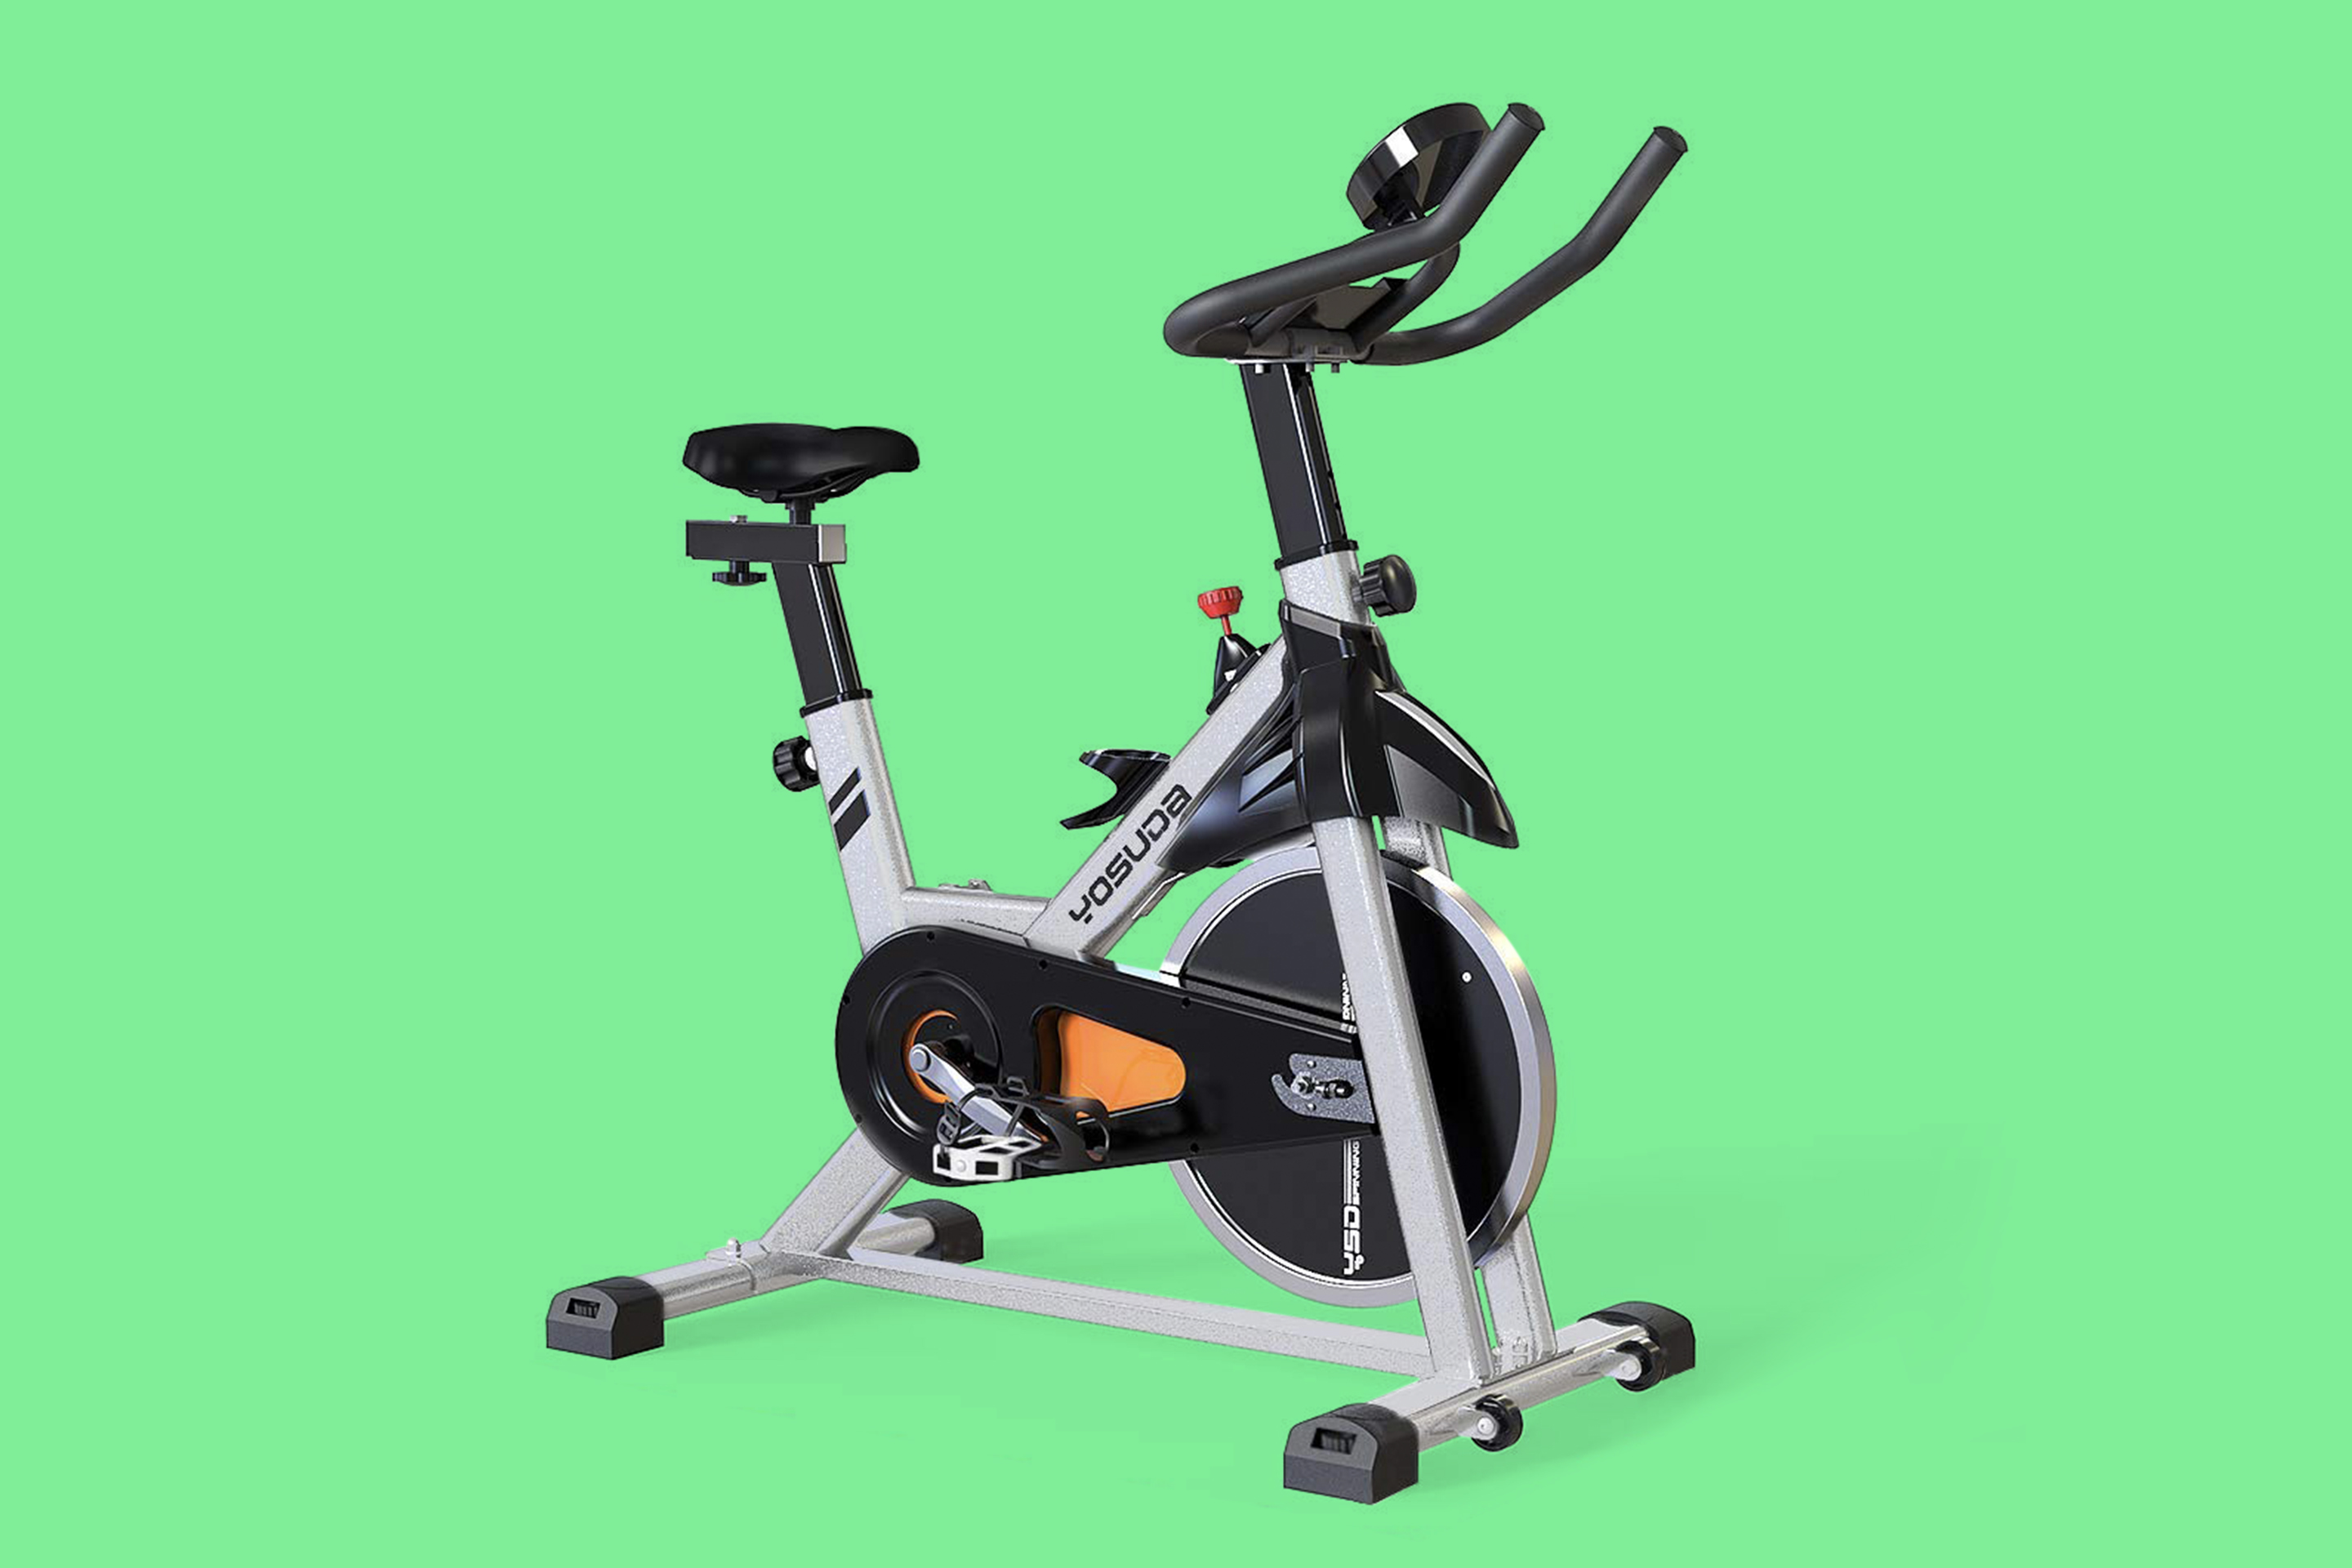 The Best Exercise Bikes for Your Money